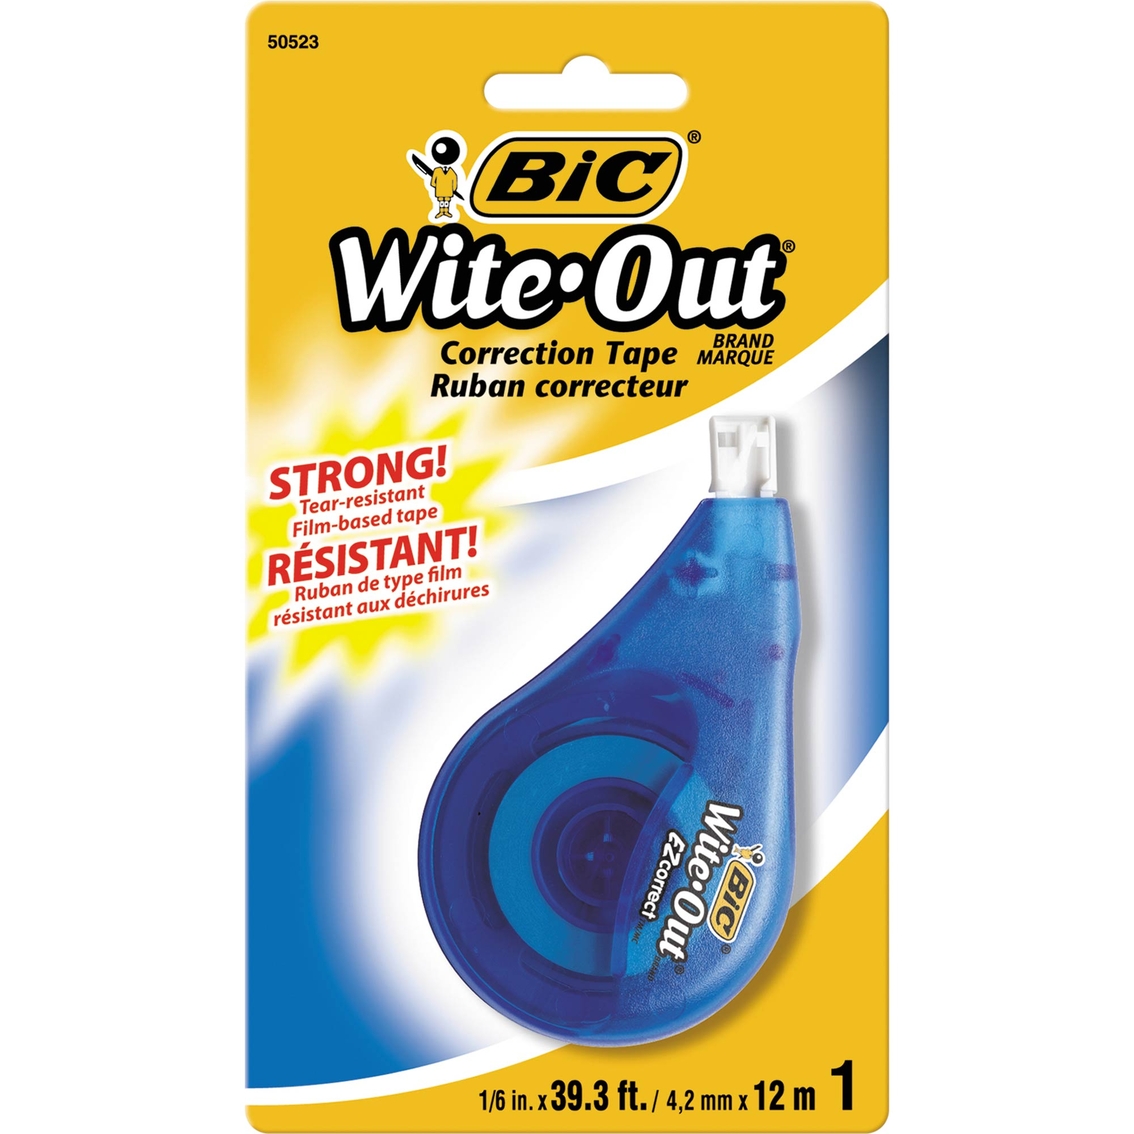 Bic White Out Correction Tape Tape Adhesives And Fasteners Household